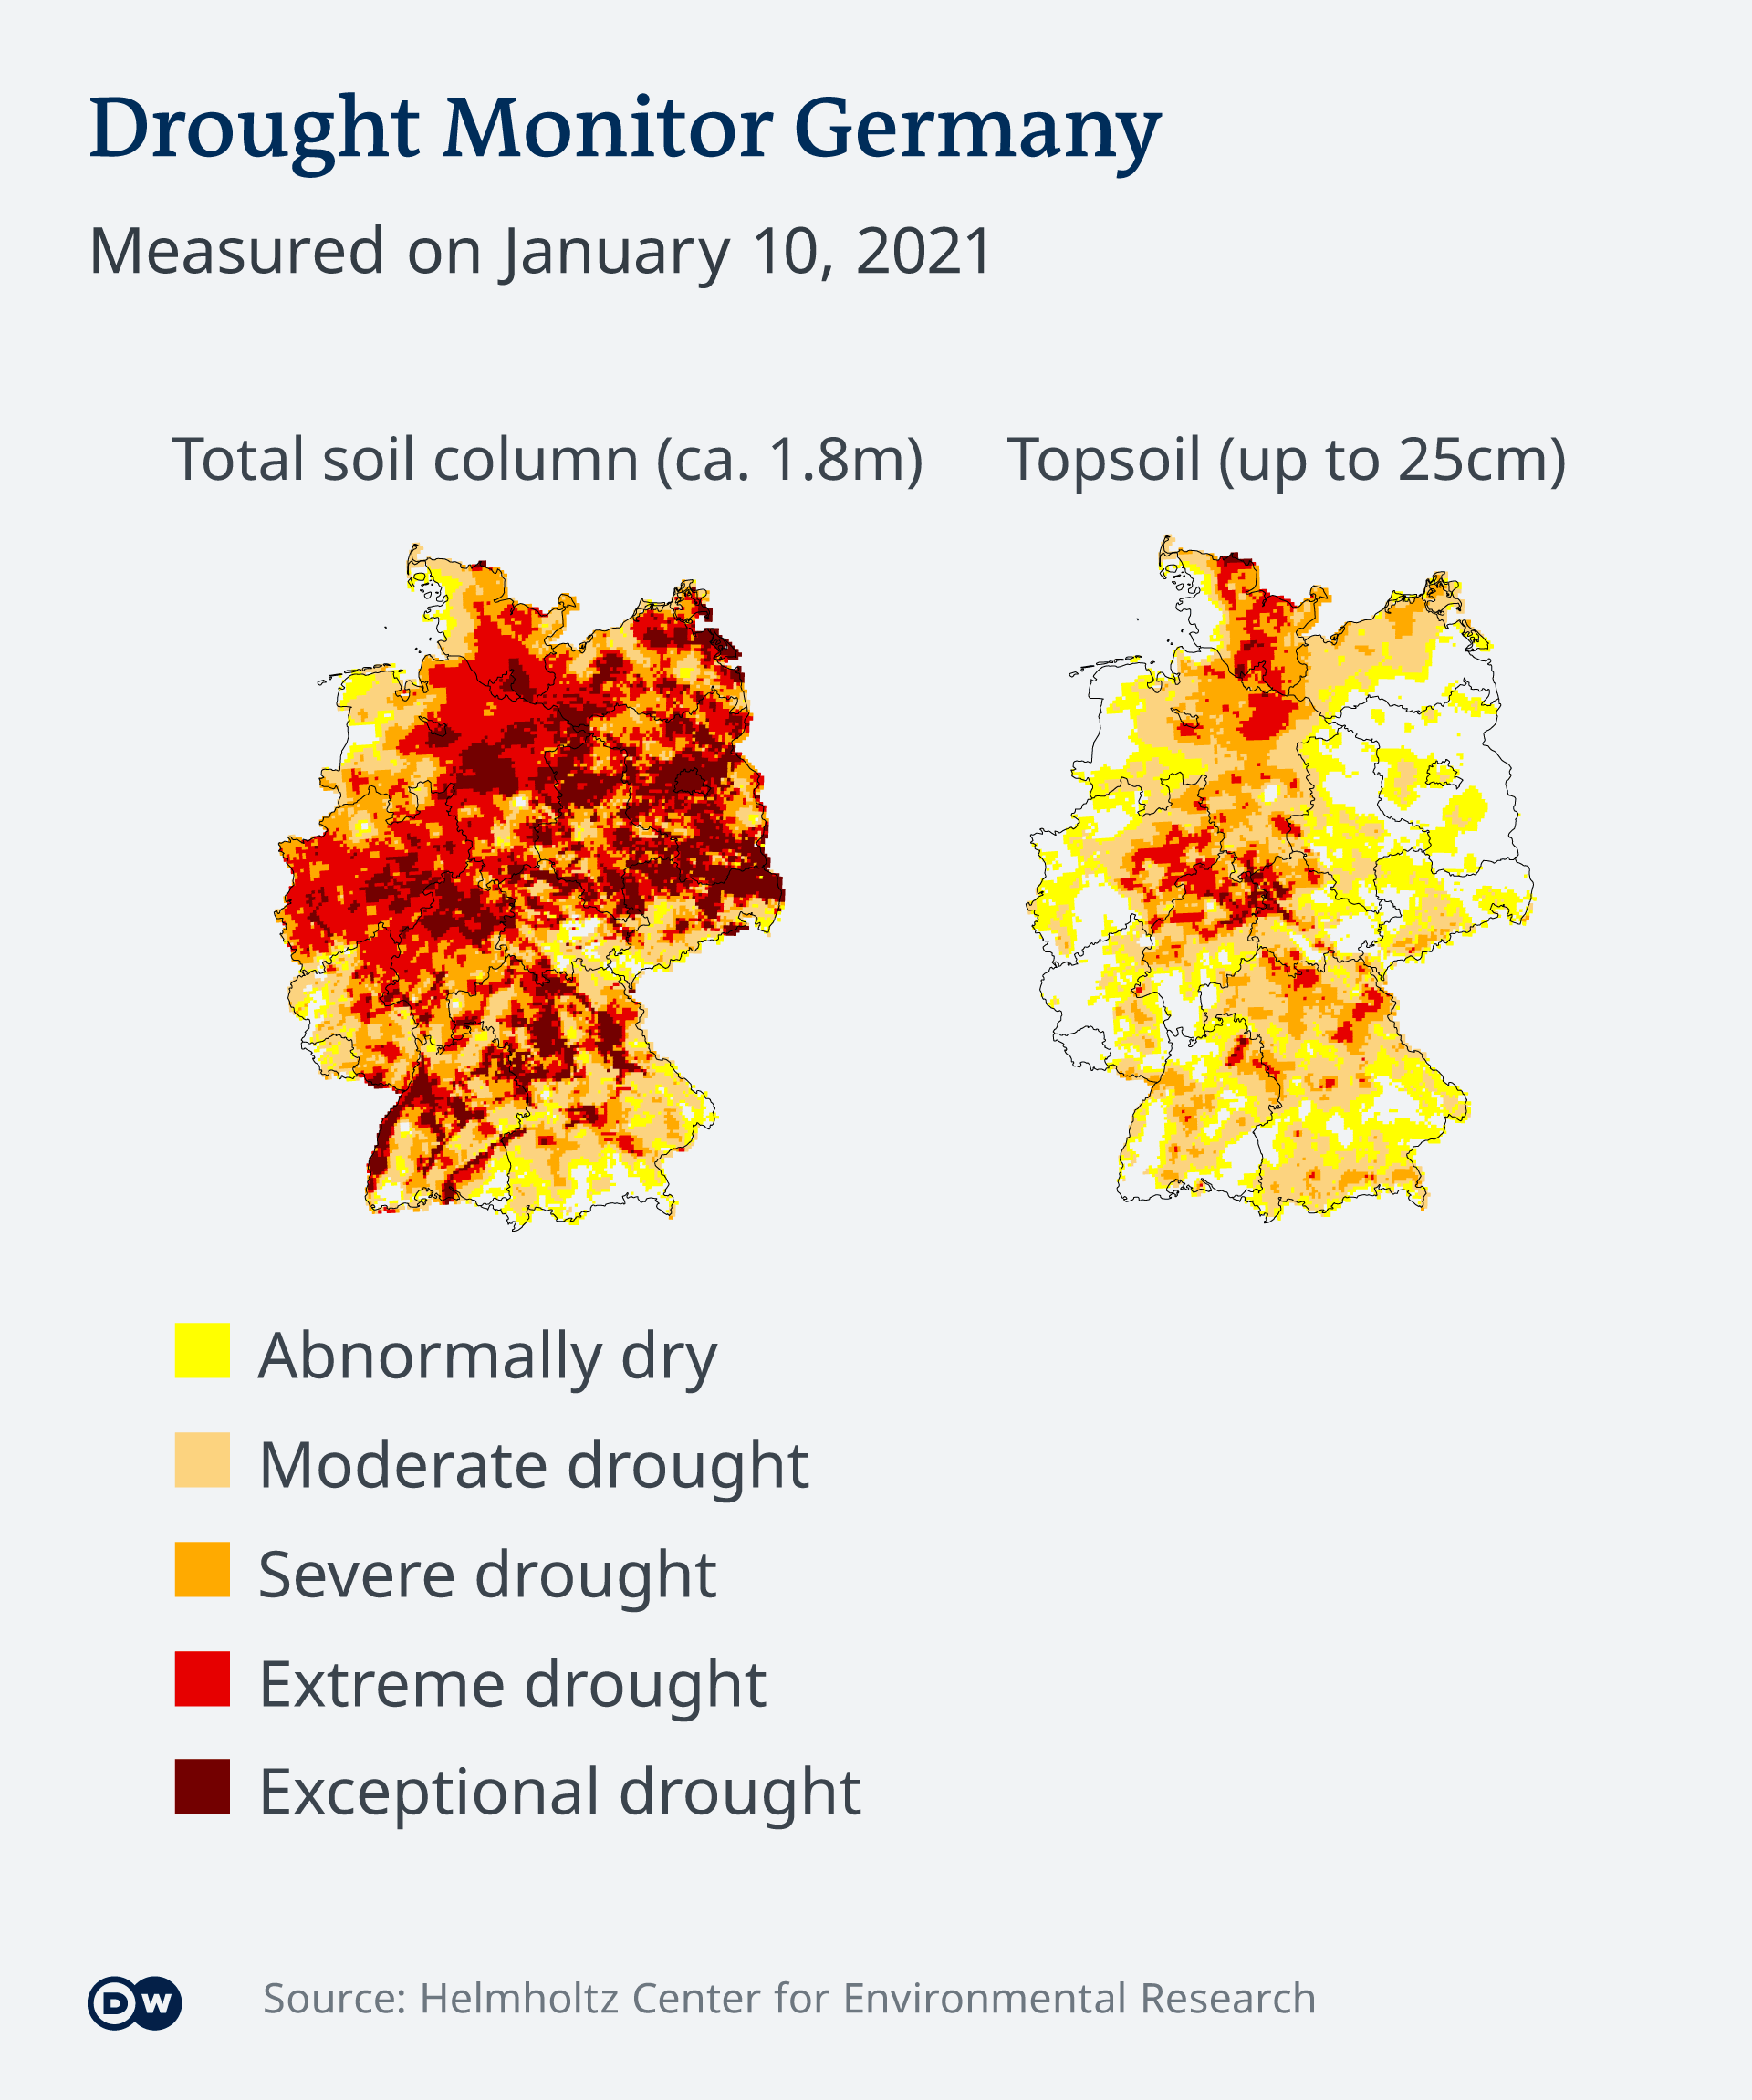 A graphic showing how dry the soil is in Germany